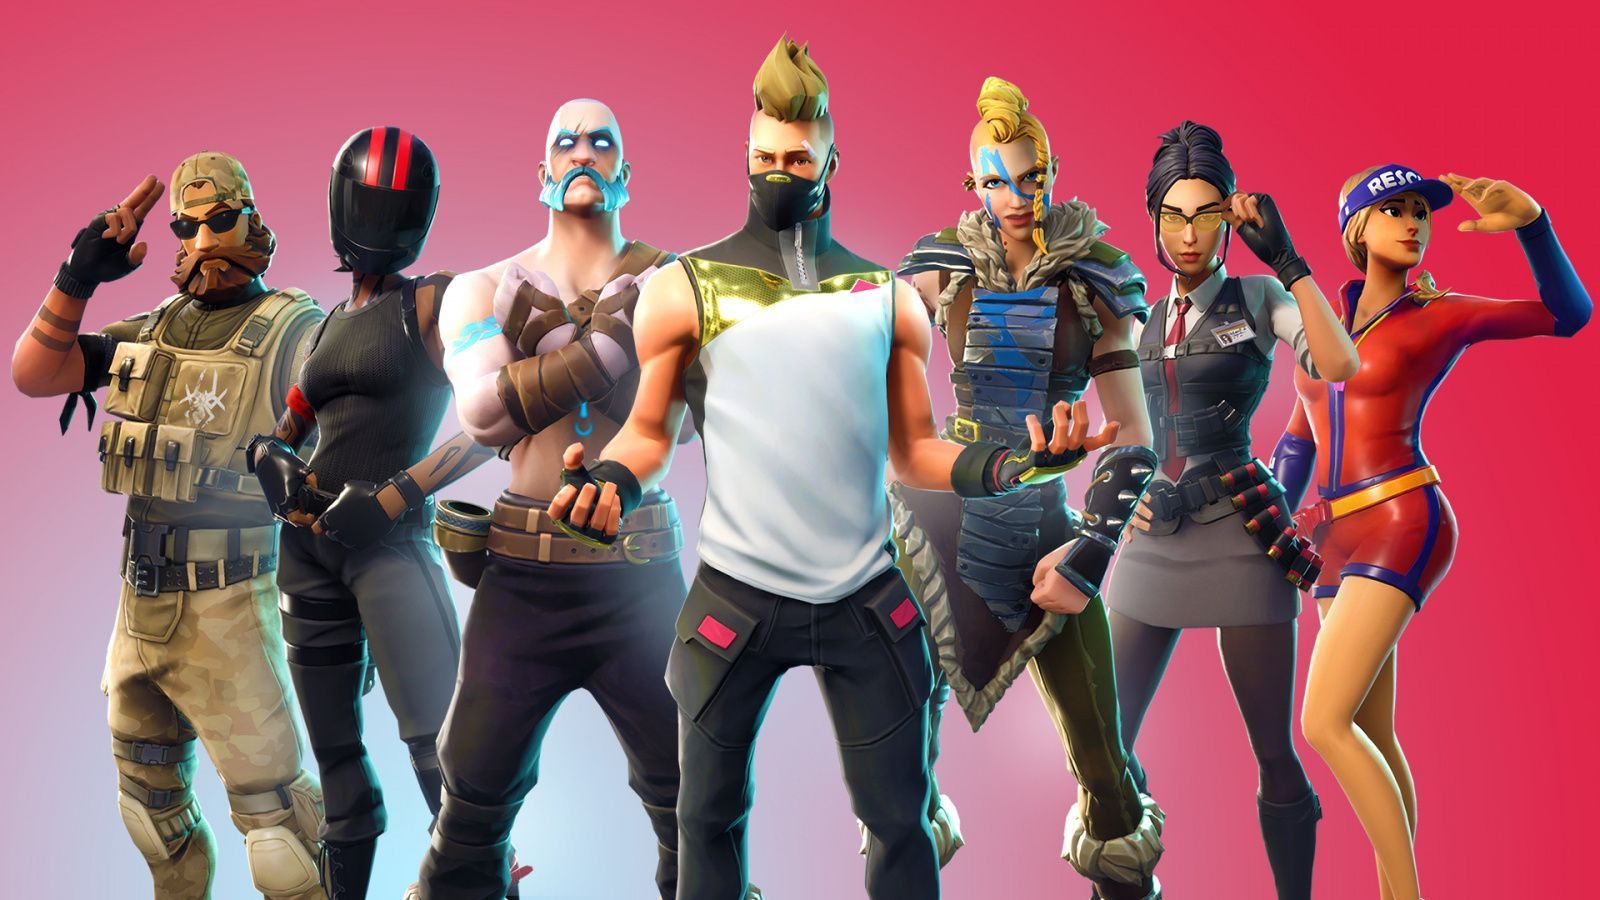 Fortnite characters in front of a pink background - Fortnite